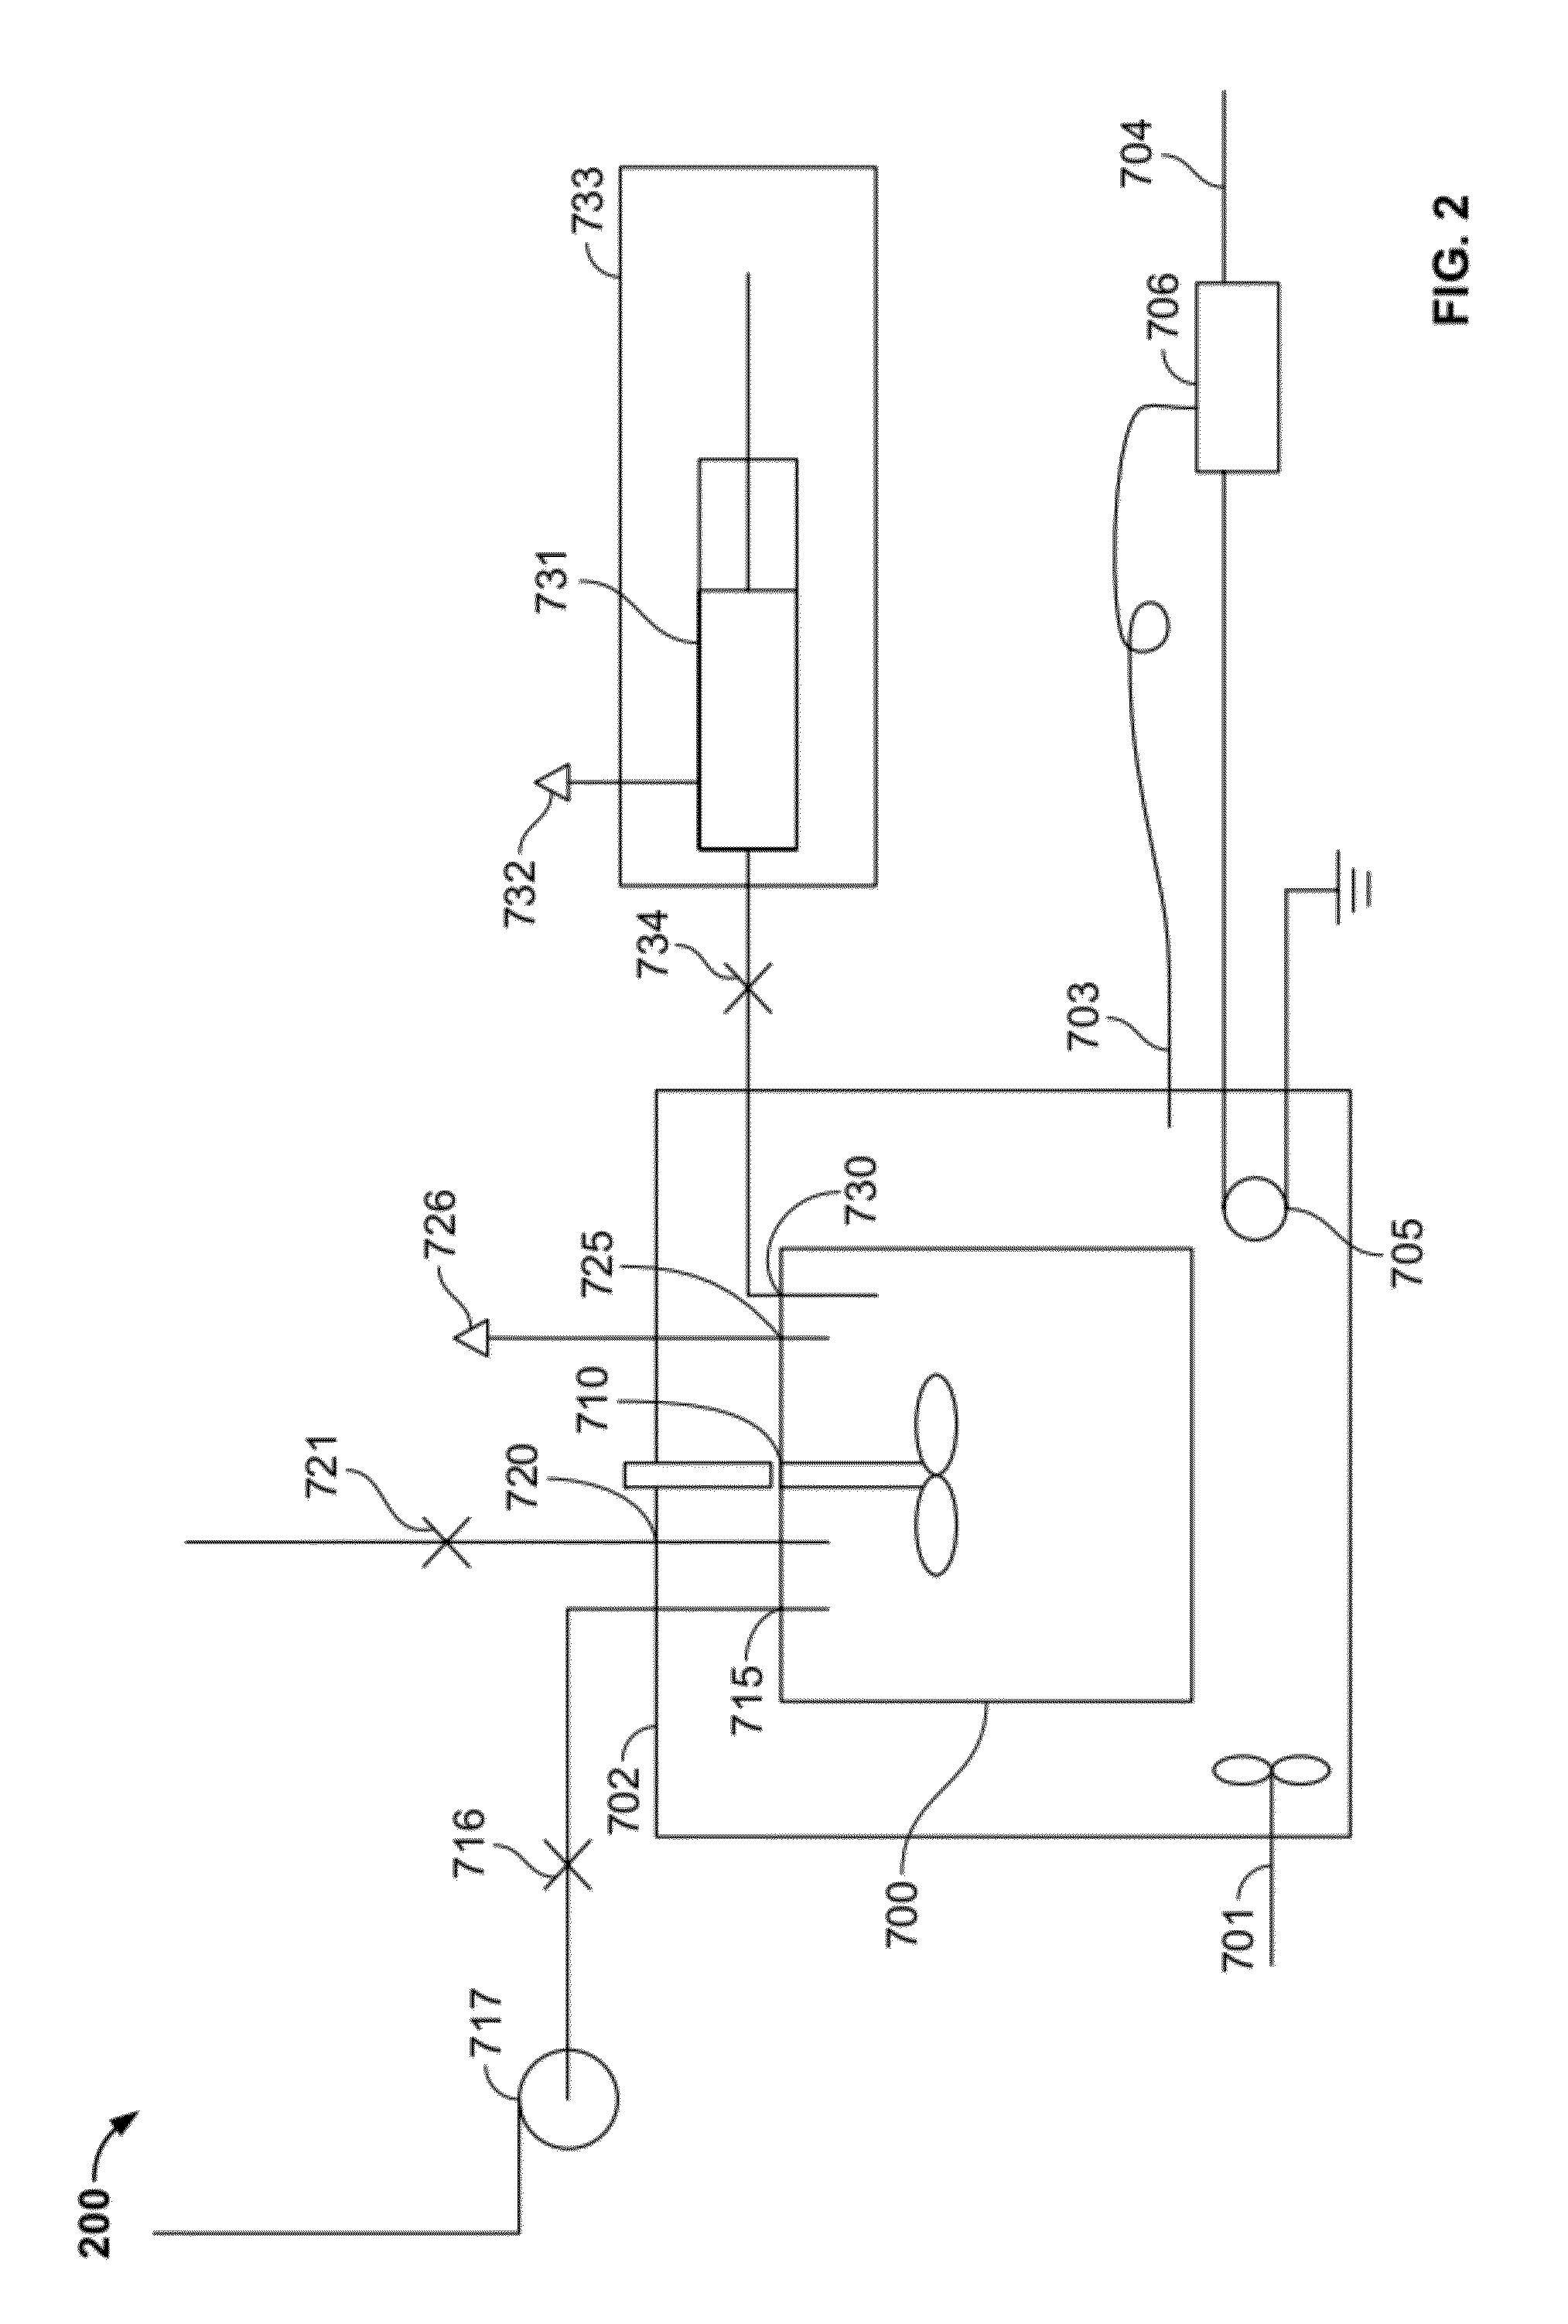 Process to remove product alcohol from a fermentation by vaporization under vacuum